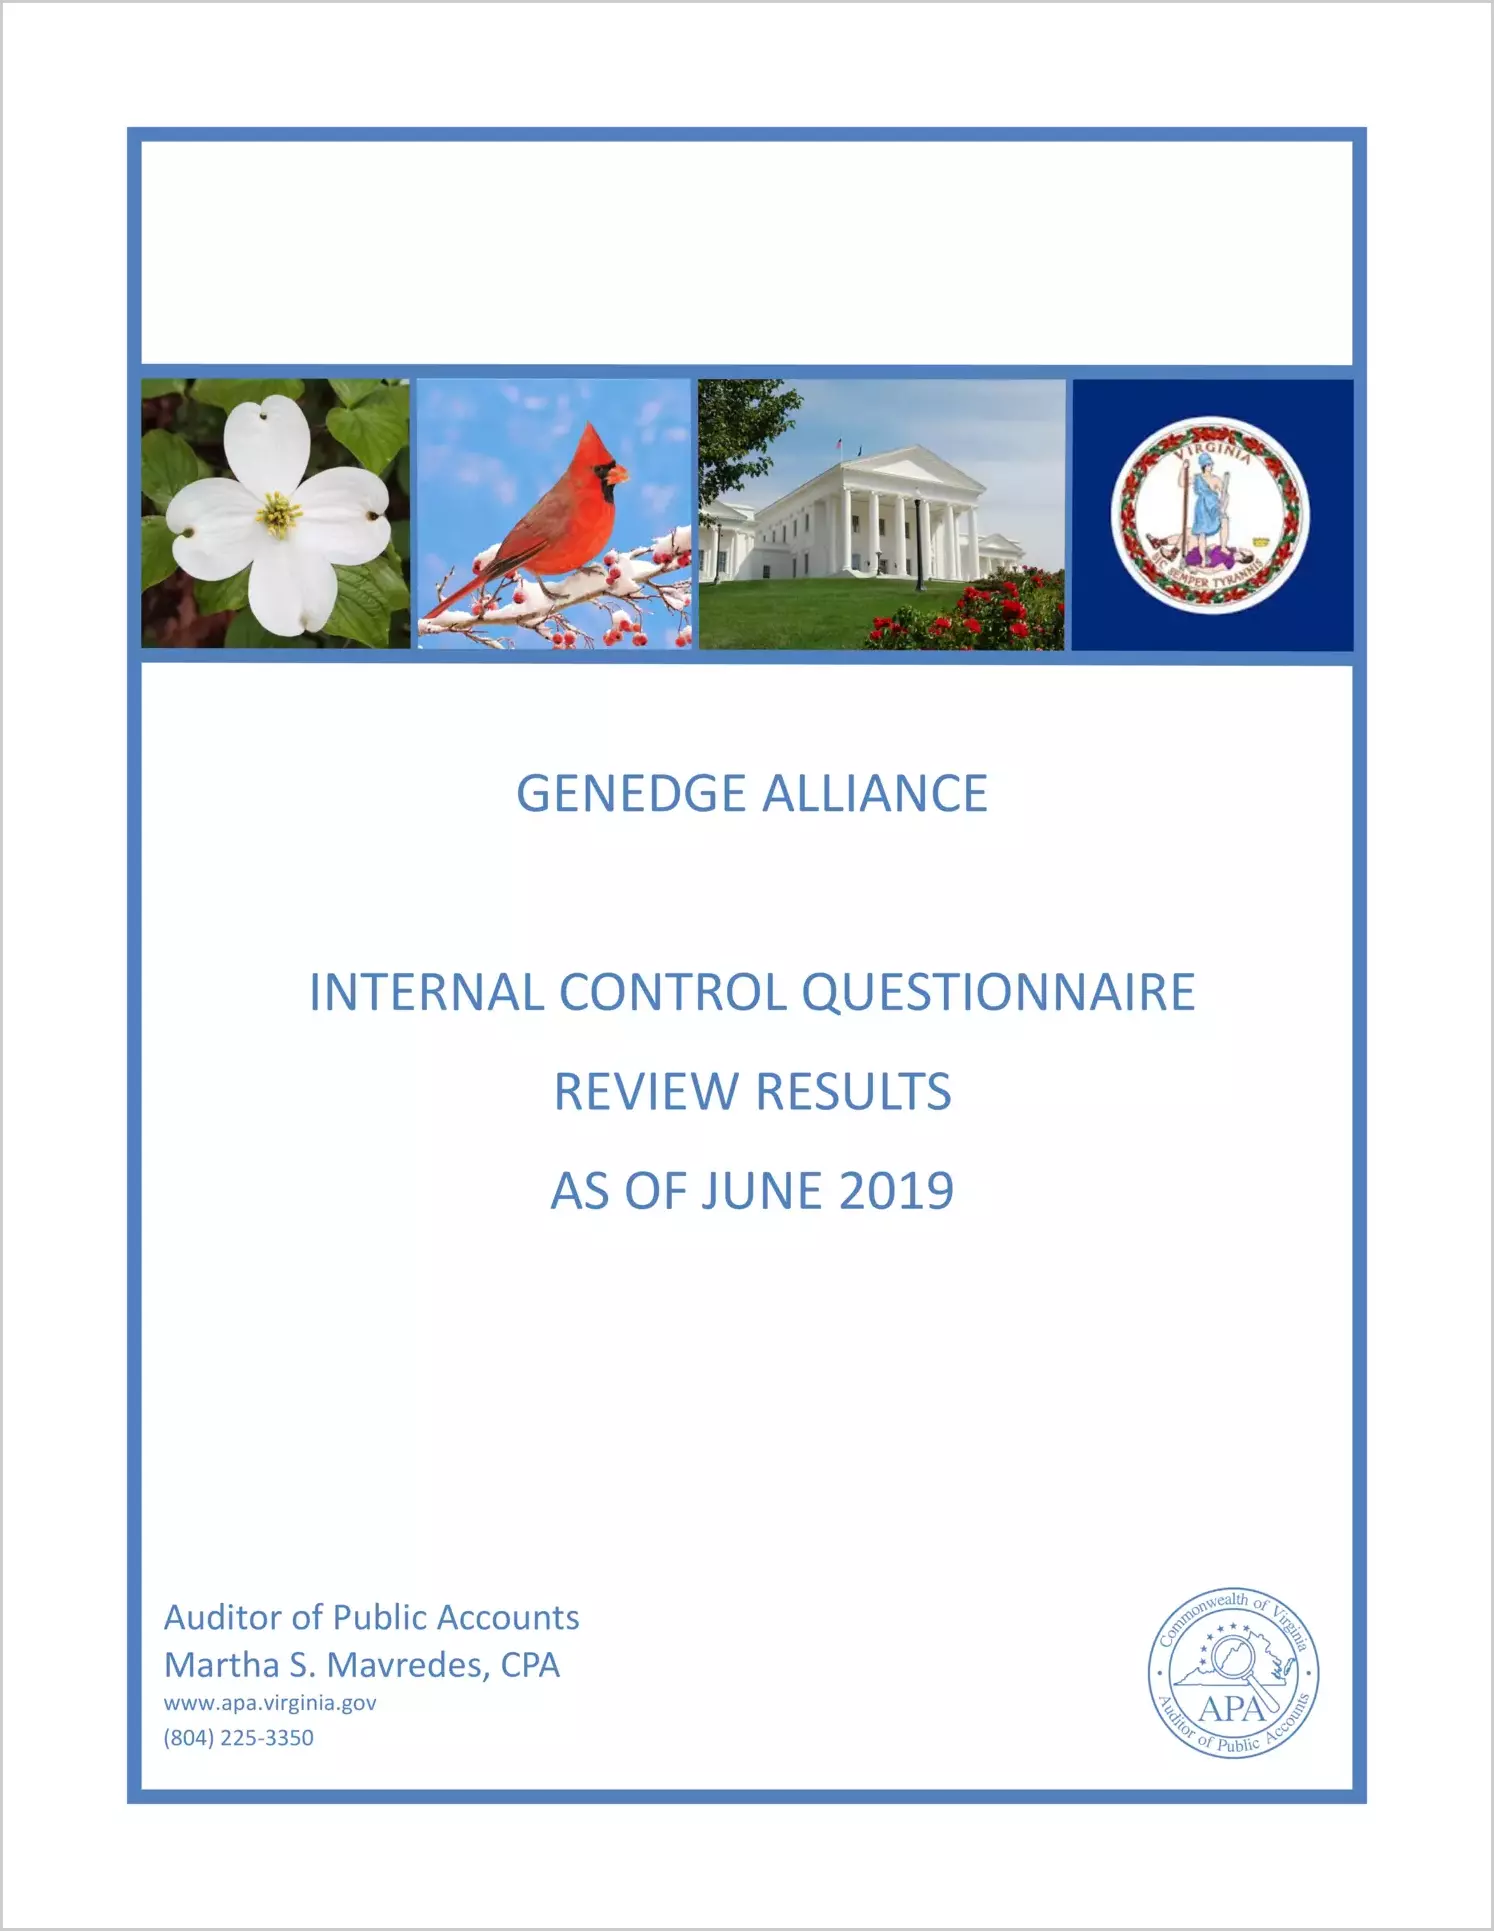 GENEDGE Alliance Internal Control Questionnaire Review Results as of June 2019